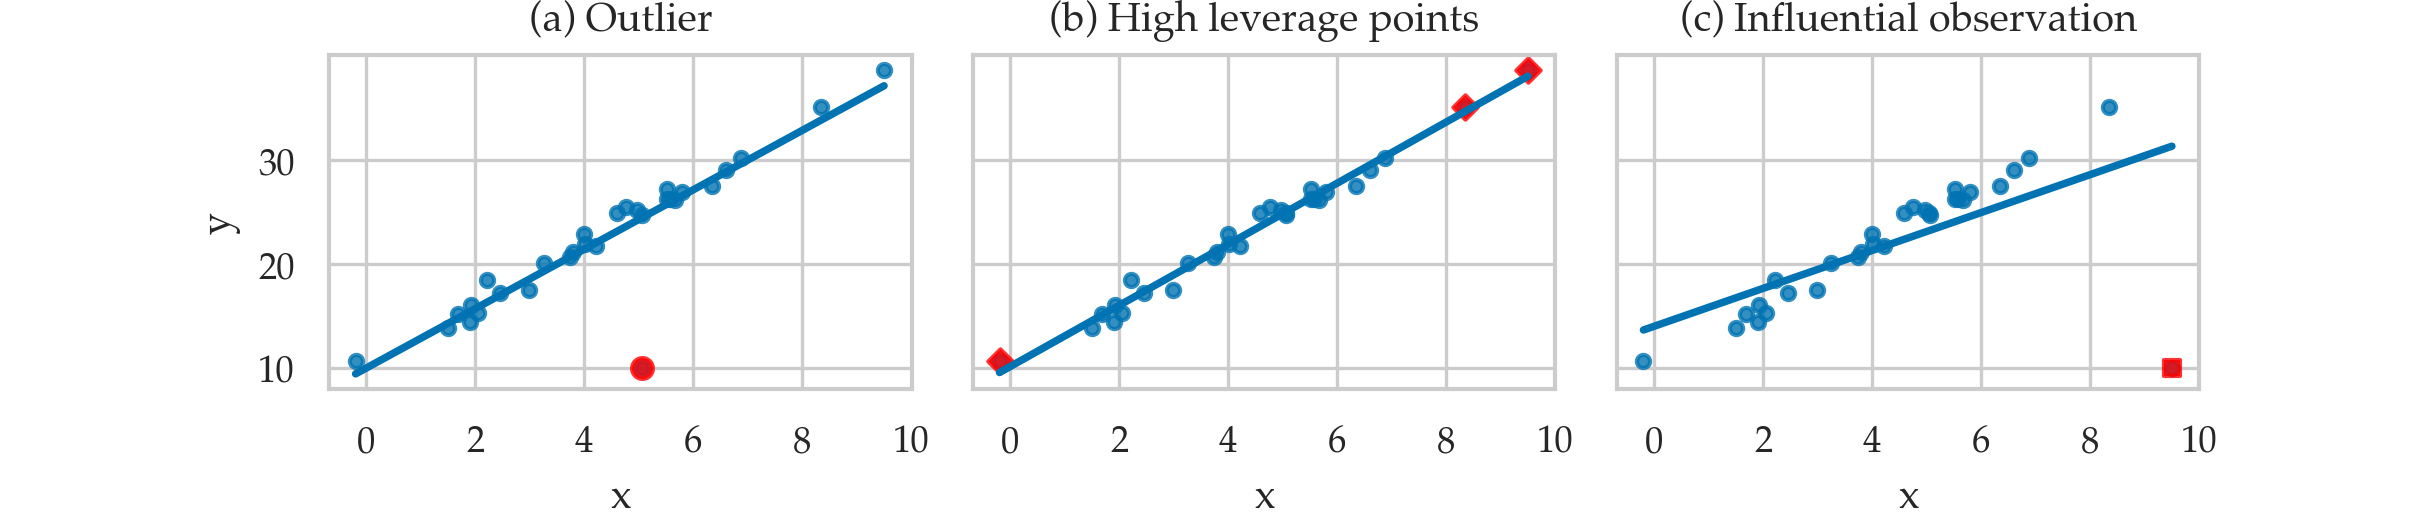 Examples of outliers, high leverage points, and influential observations.